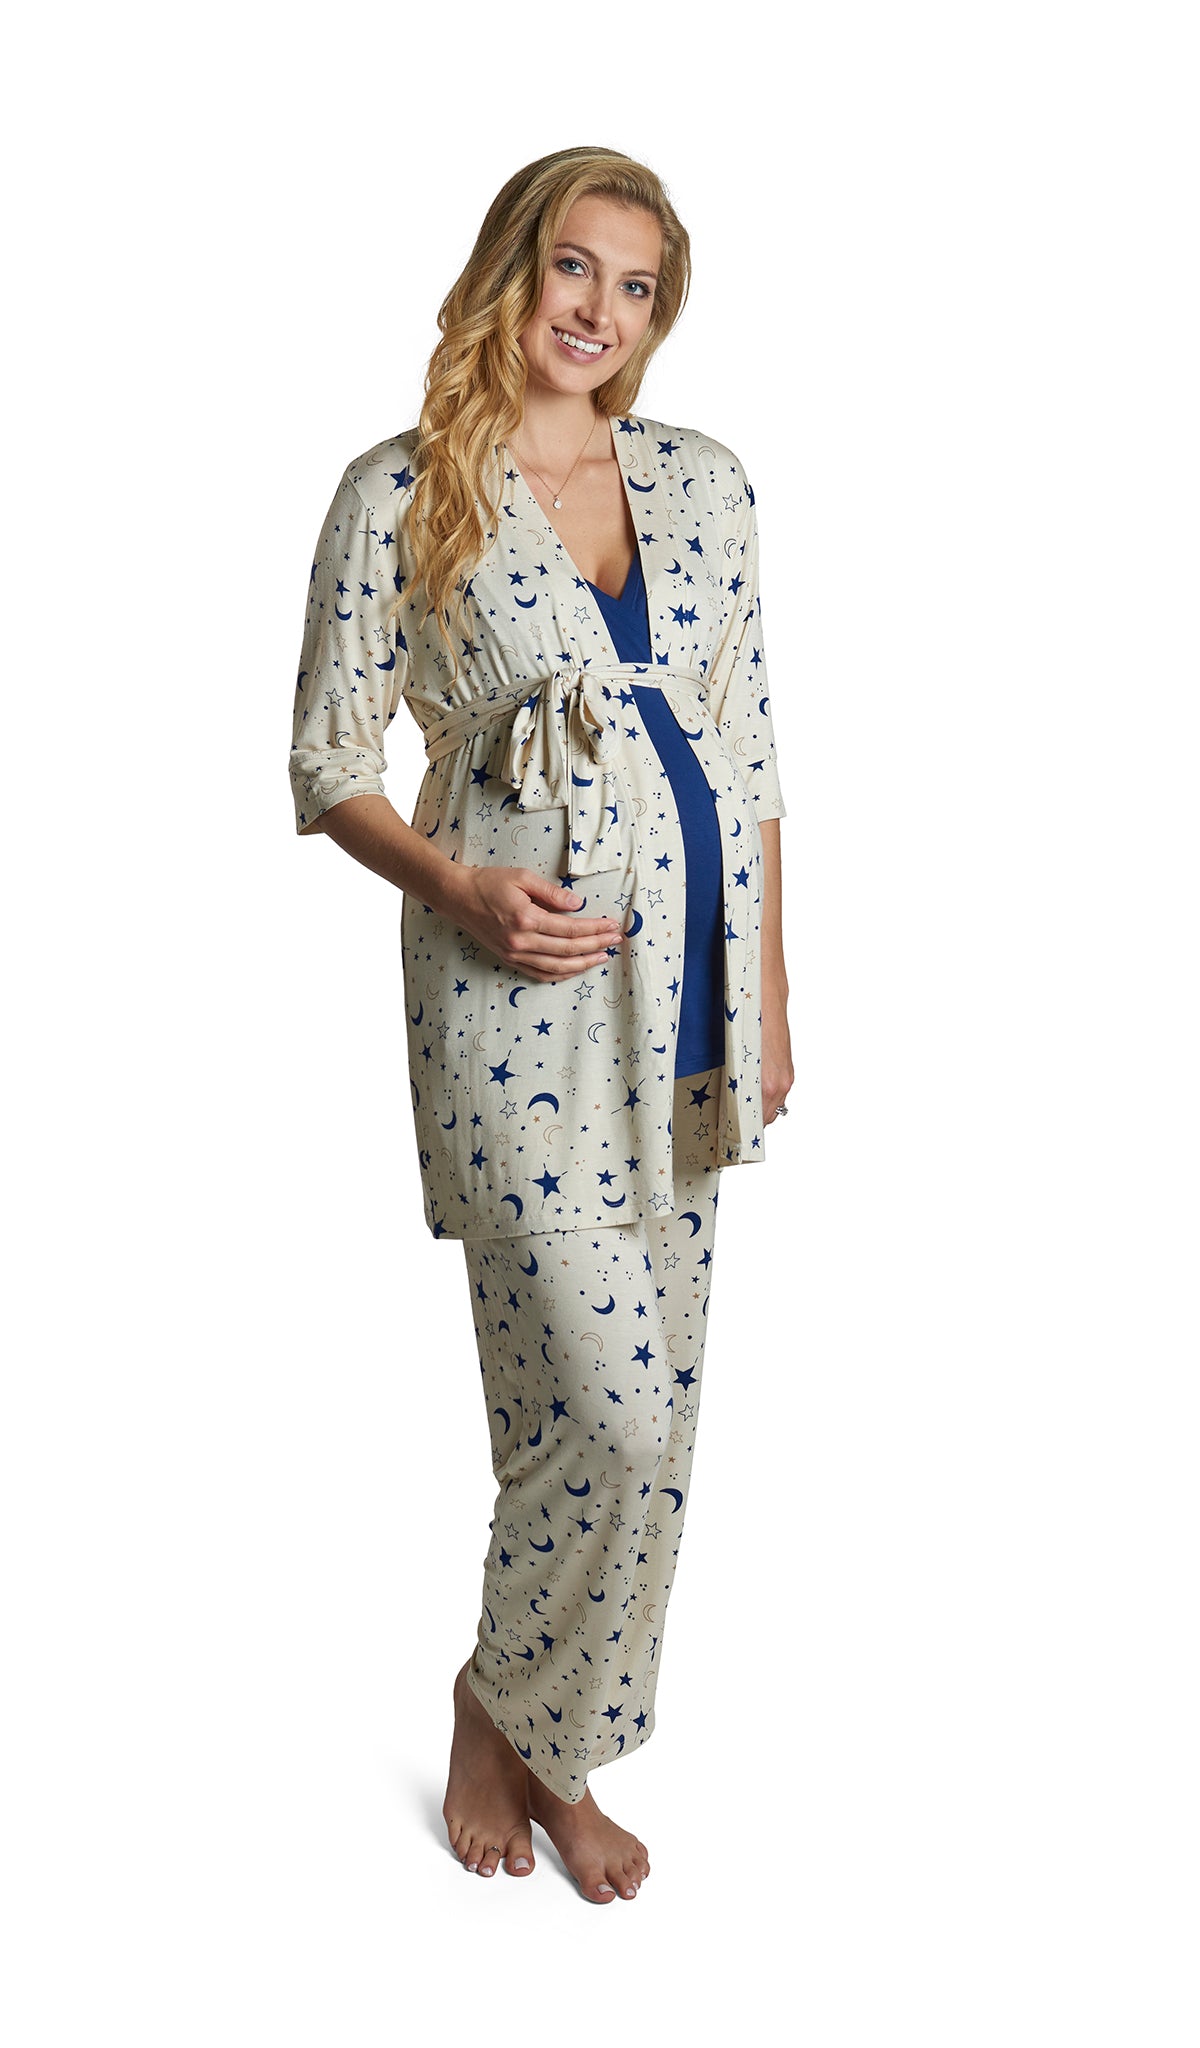 Twinkle Analise 3-Piece Set. Pregnant woman wearing 3/4 sleeve robe, tank top and pant.